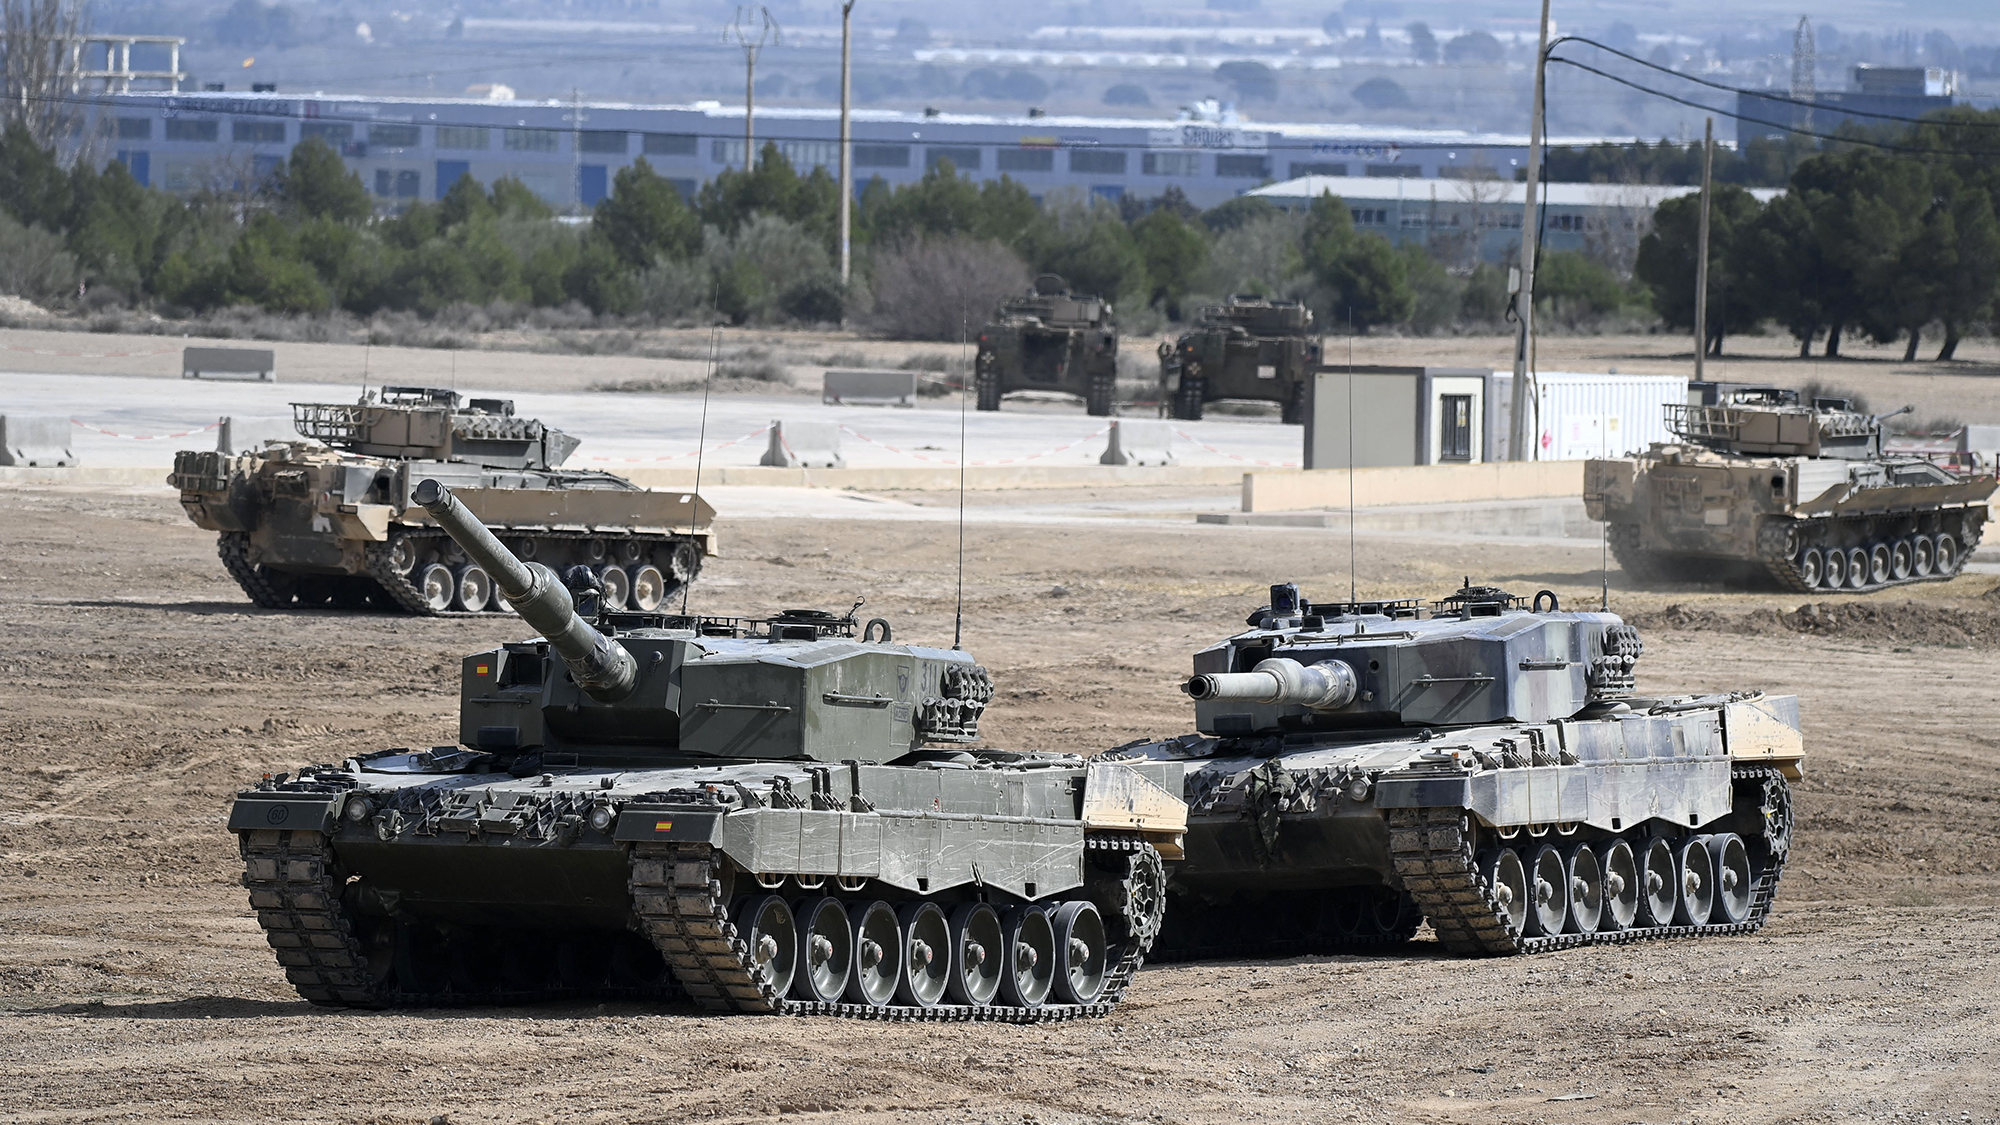 Ukrainian military personnel receive training on Leopard 2 battle tanks at the Spanish army's training center in Zaragoza, Spain, on March 13. 